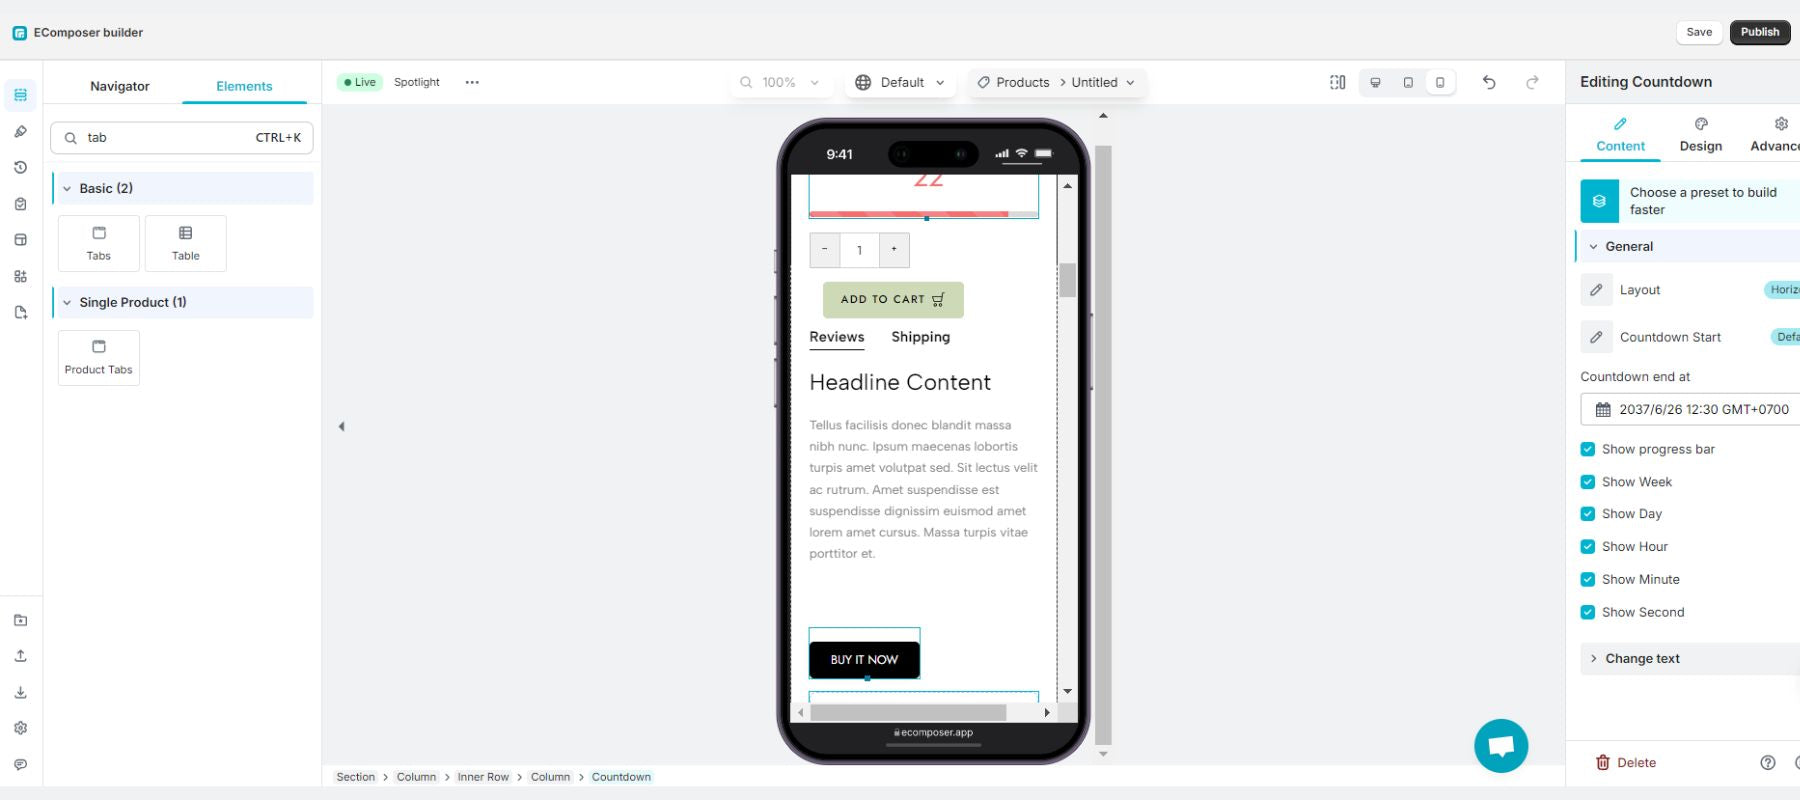 EComposer Page Builder's mobile responsive